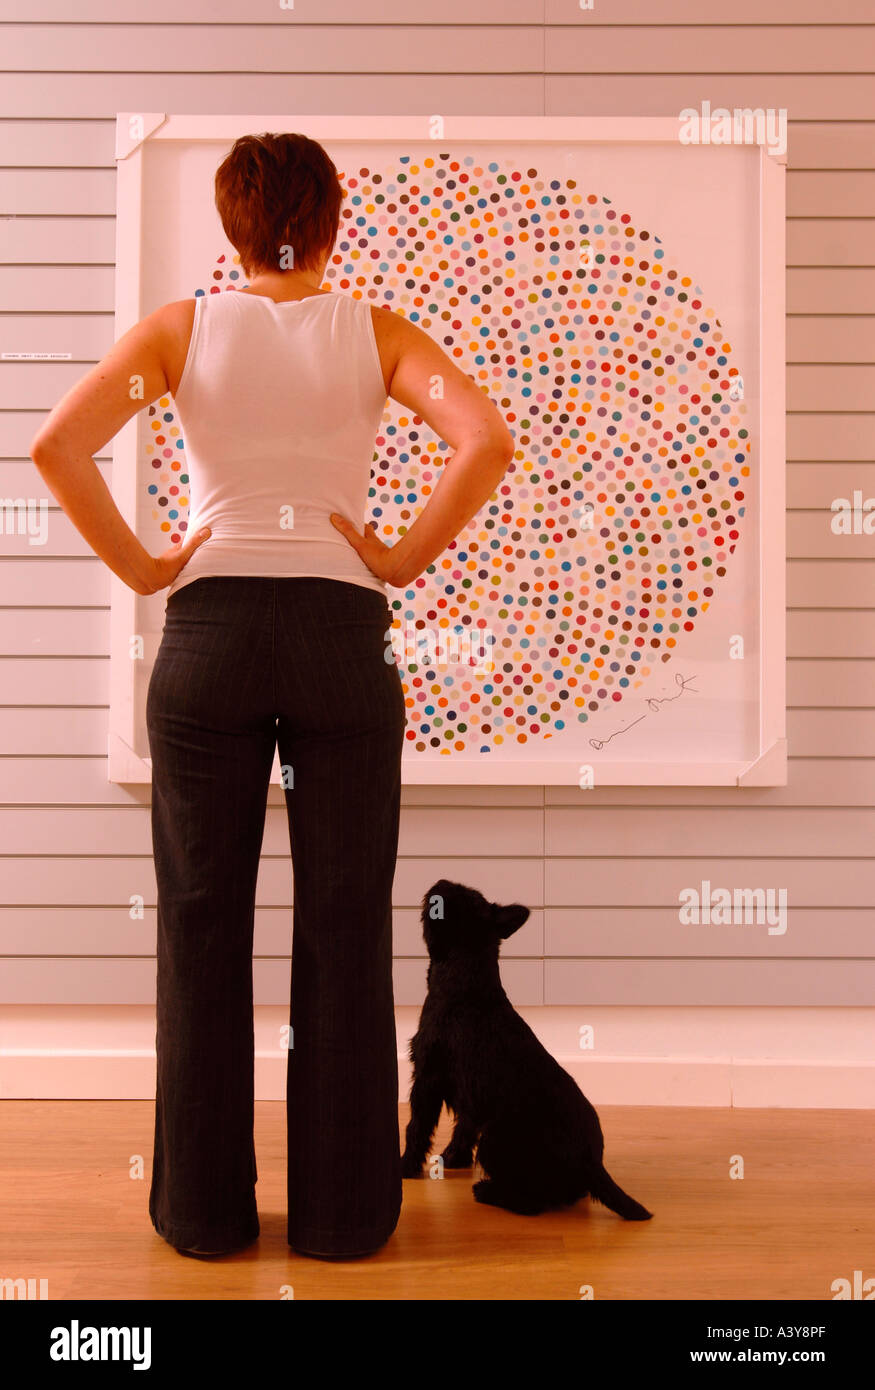 A WOMAN VIEWING A DAMIEN HIRST DOT PAINTING TITLED VALIUM IN AN EYESTORM ART GALLERY Stock Photo